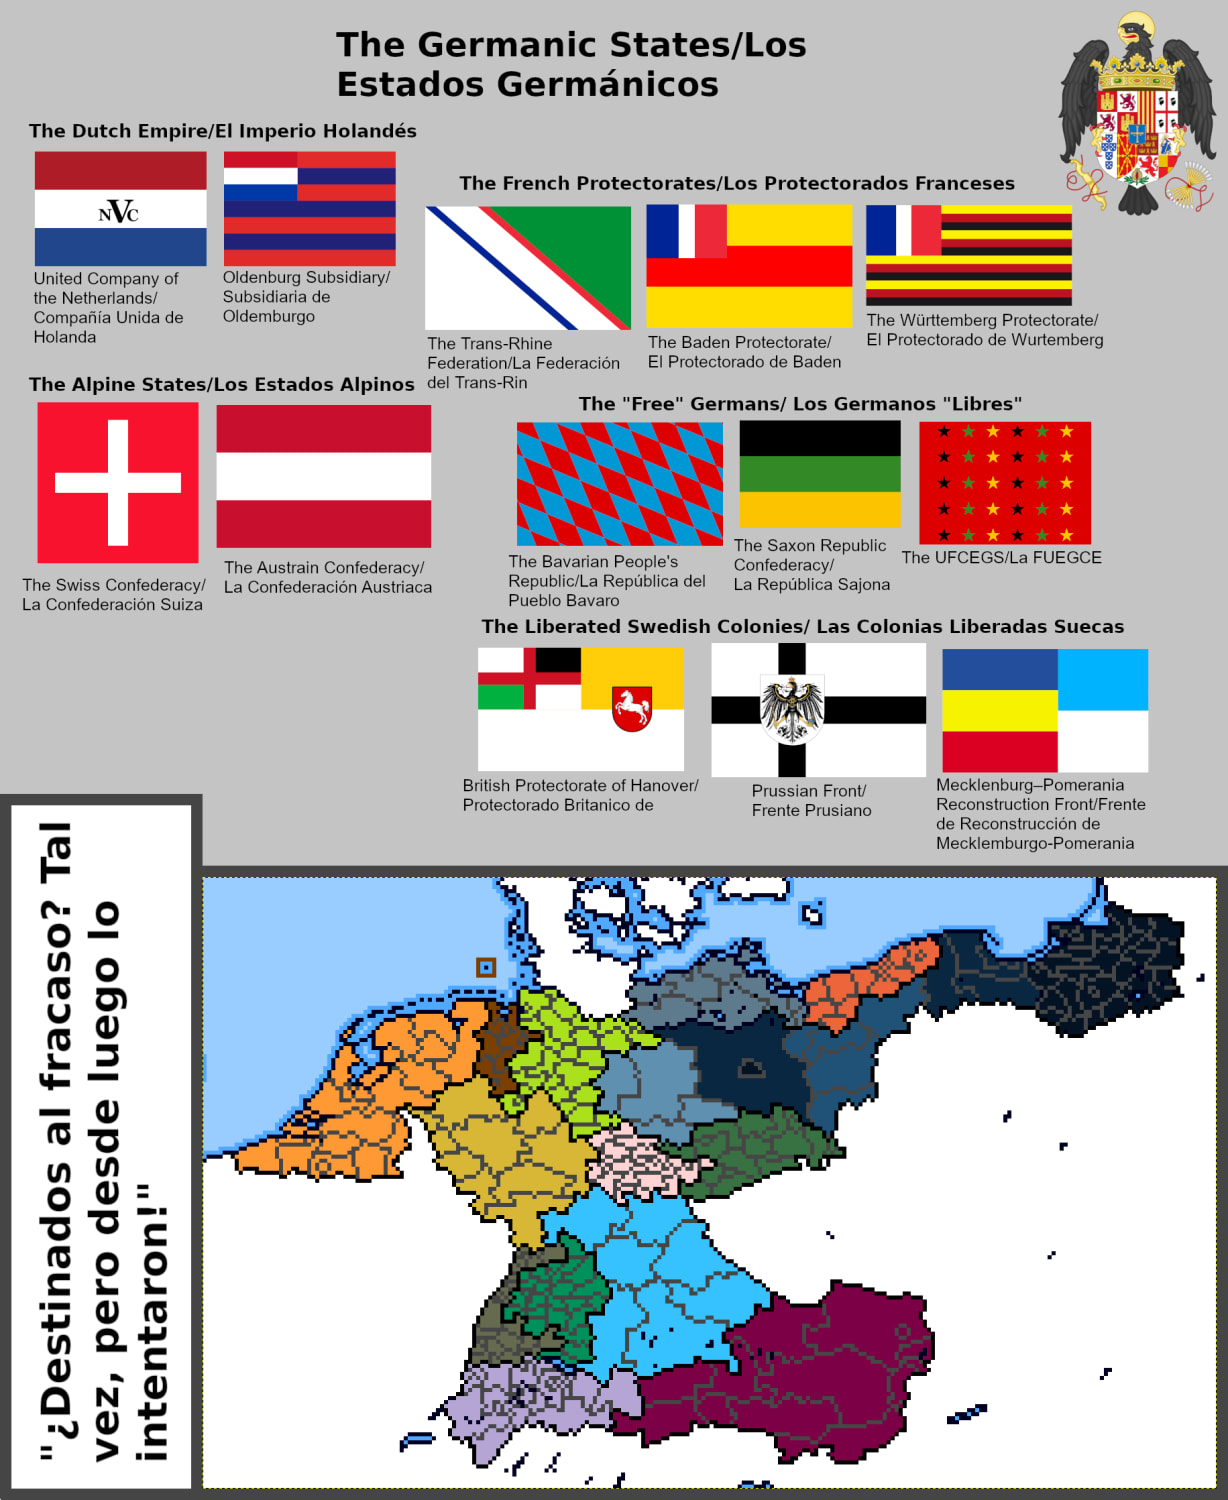 6th Infographic for my "Letter of the Serpents" setting. This time focusing on Europe's Germanic States. Will happily answer questions about the lore in comments. Will also take suggestions for future Infographics!